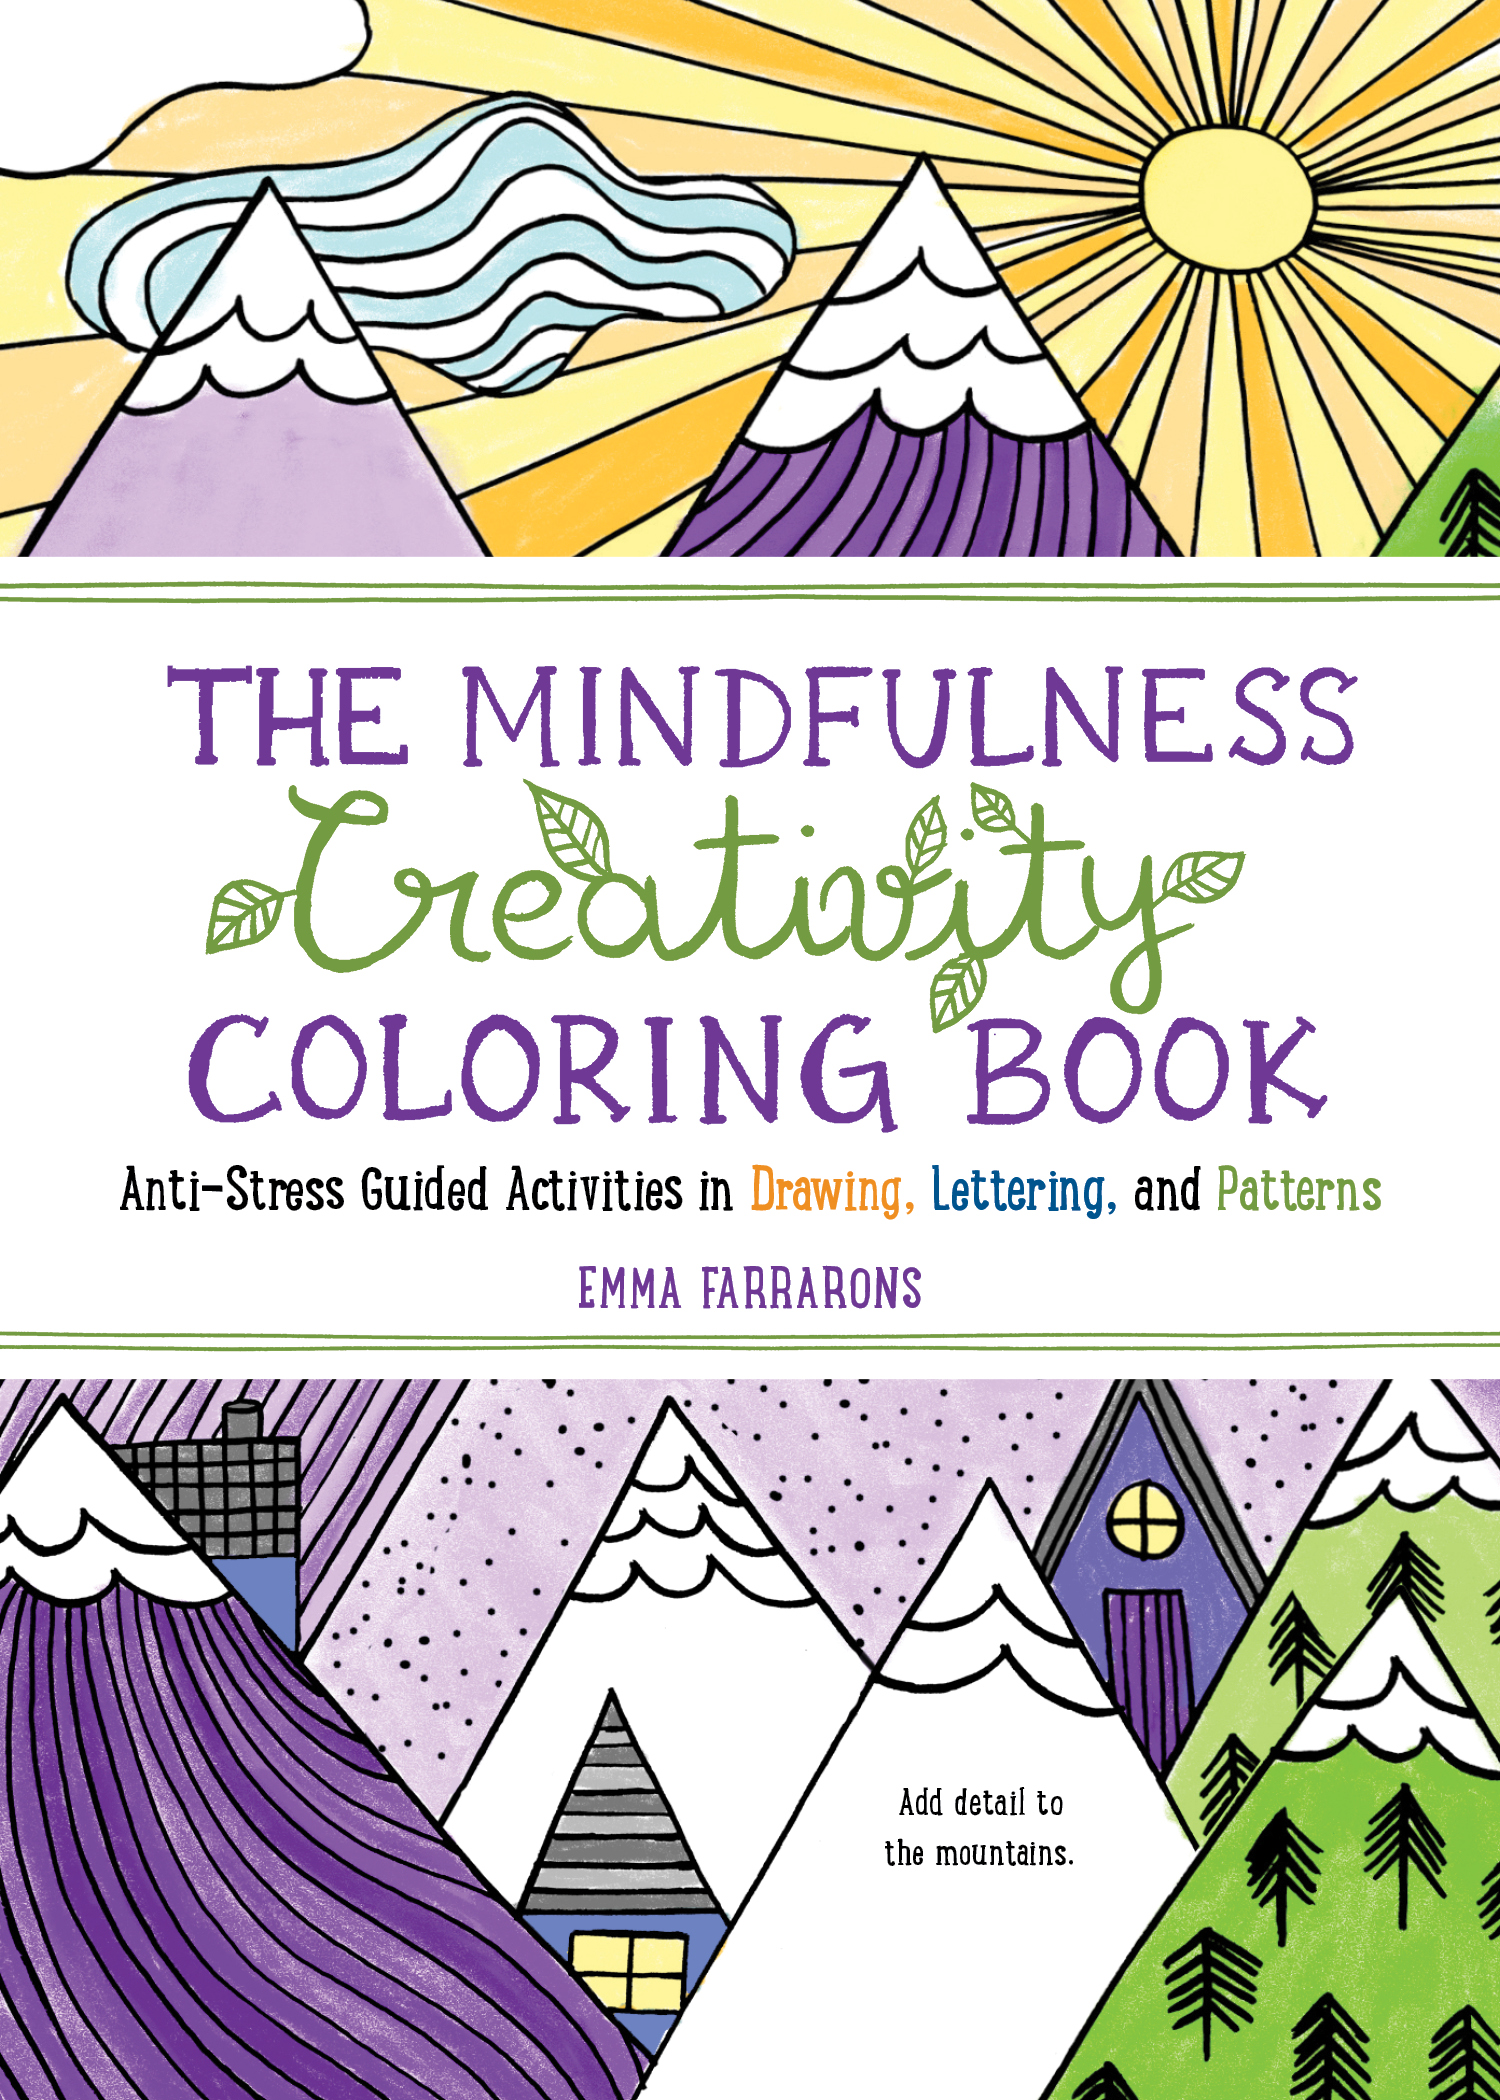  Tracing Book for Adults: Oodles of Doodles: Stress relief and  relaxation: Mindful tracing and colouring book for adults full of doodles,  robots, and floral designs: 9781805172697: The Tracing Troubadour: Books